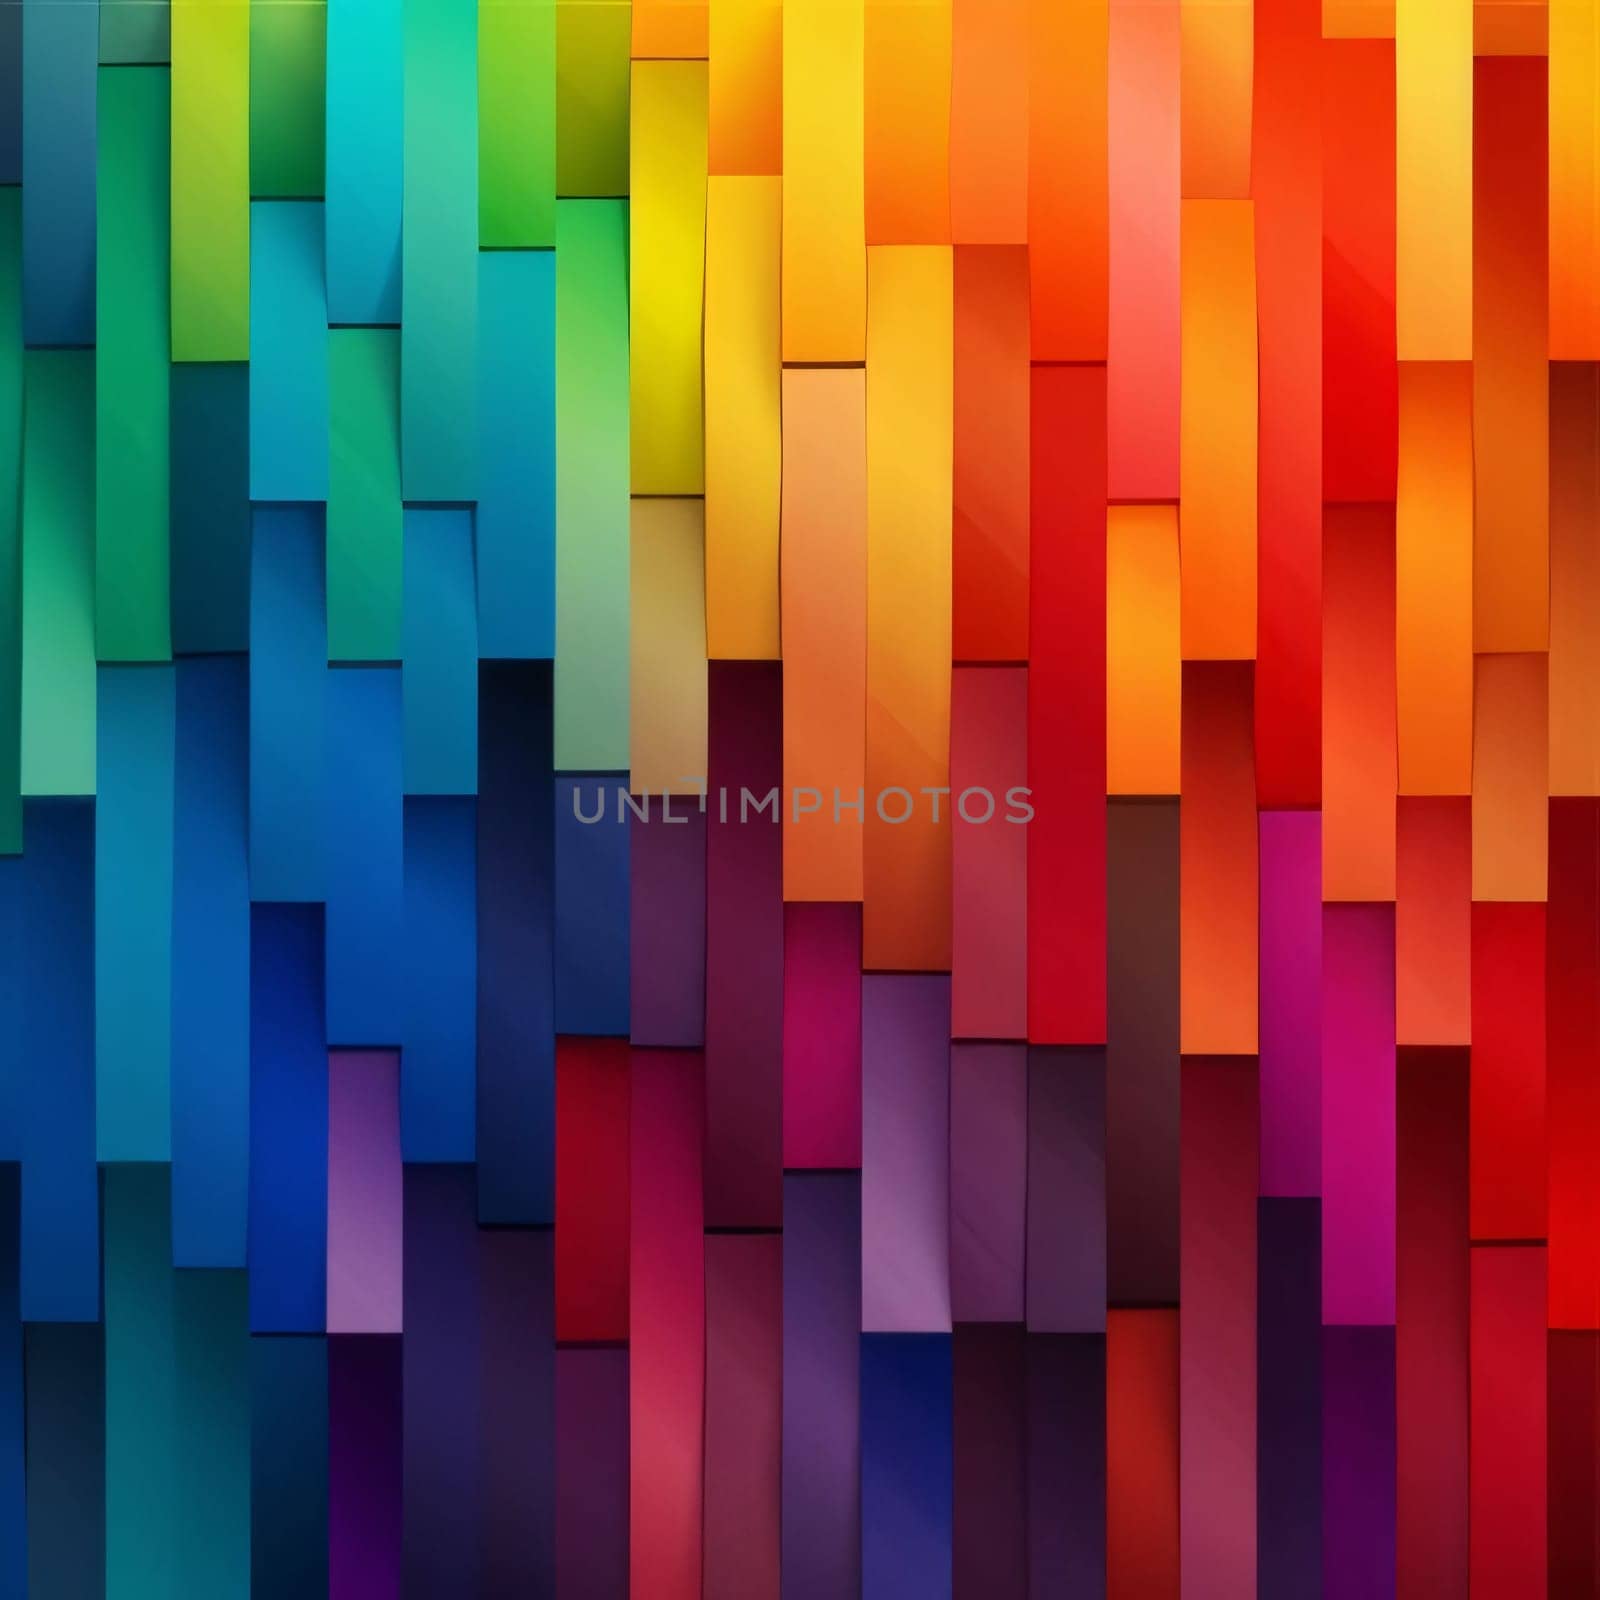 Abstract background design: Colorful abstract background with stripes. Vector illustration. Eps 10.